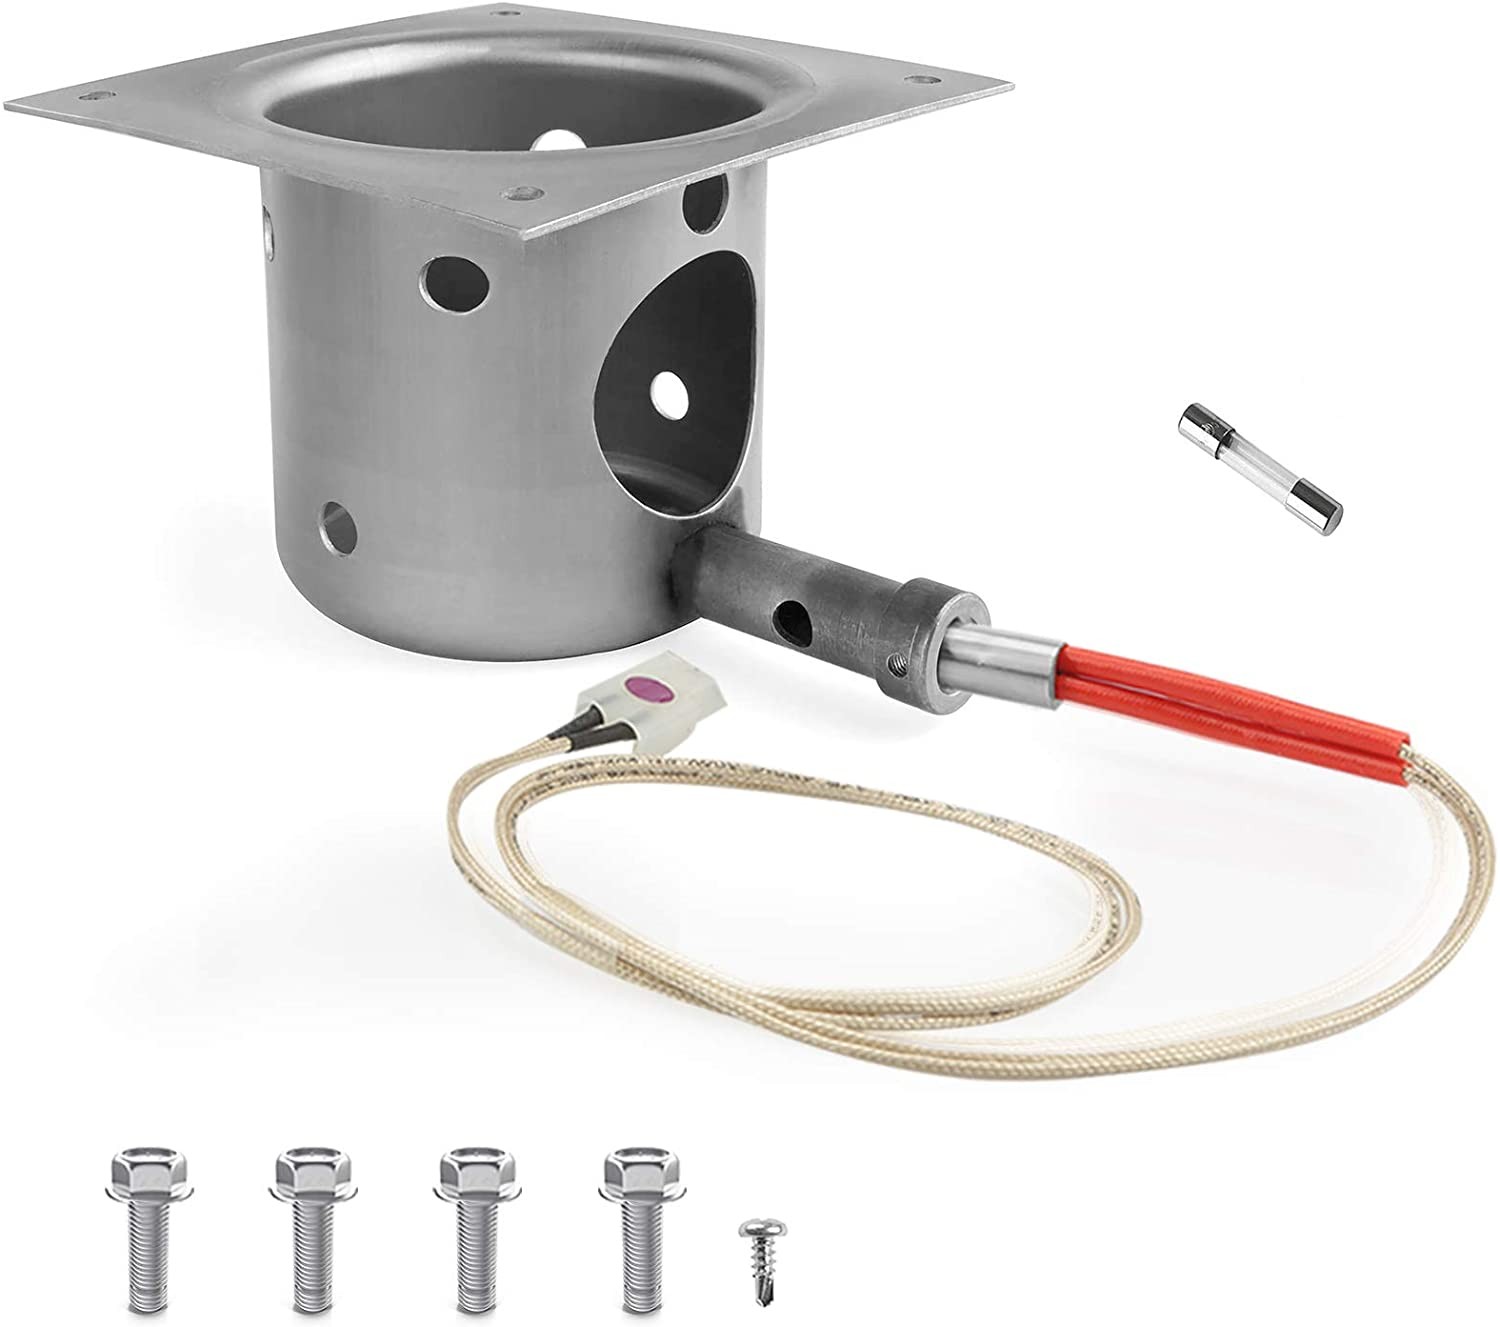 Replacement Burn Pot and Hot Rod Ignitor Kit for Traeger and Pit Boss Pellet Grills